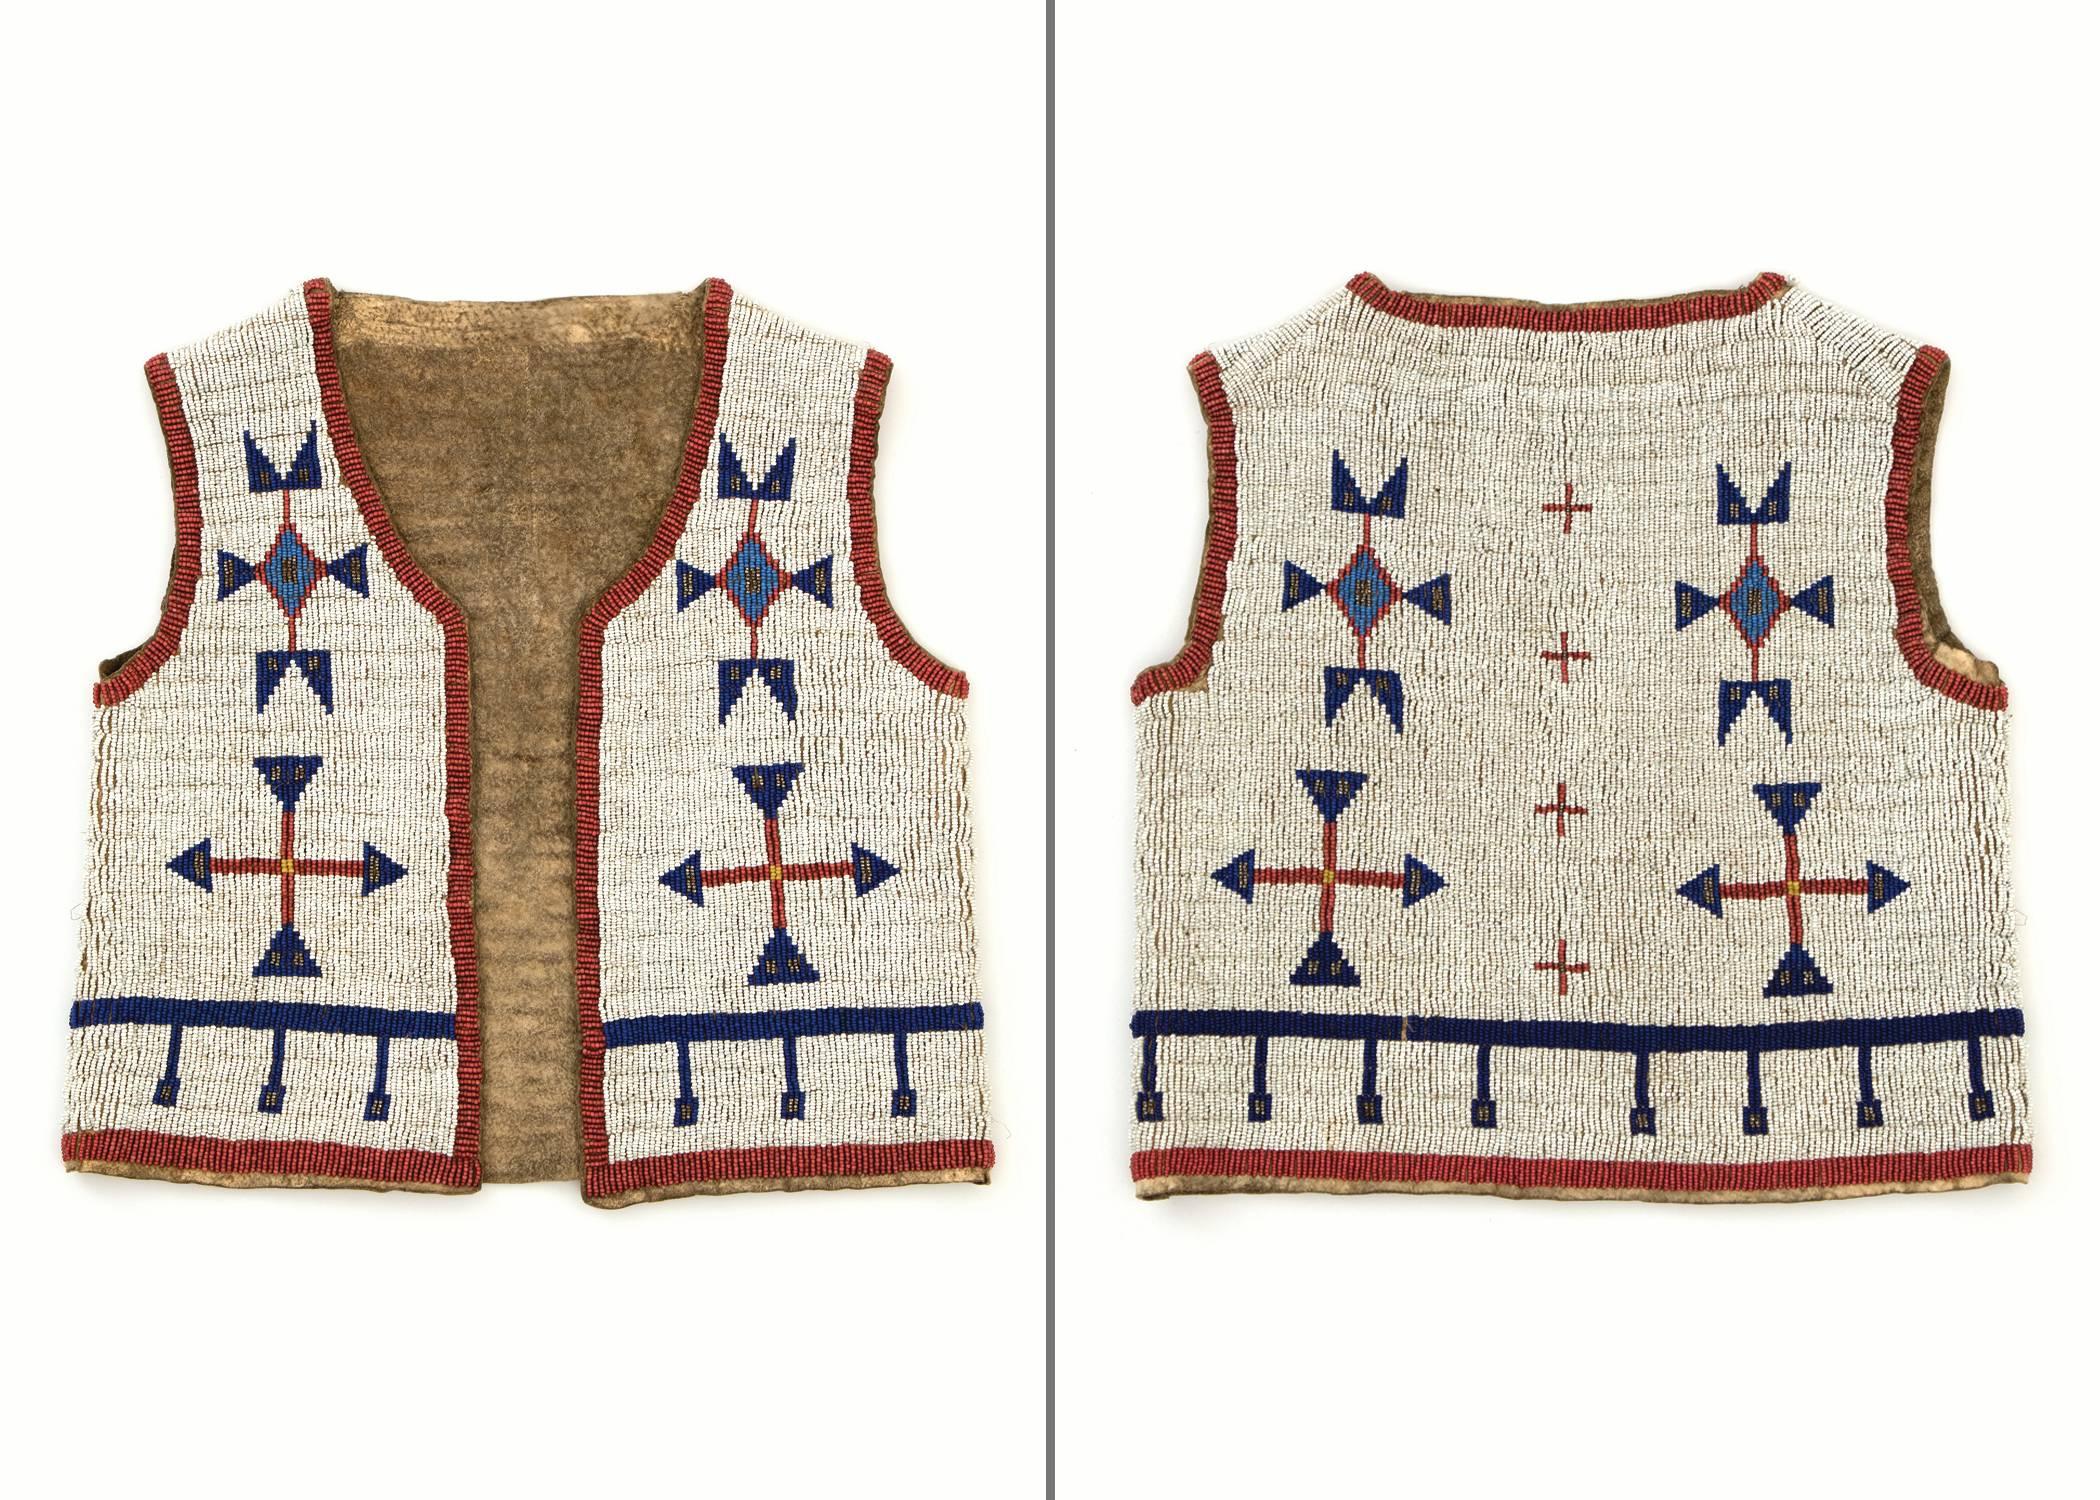 19th century antique Sioux (Native American/Plains Indian) child's beaded vest constructed of native tanned hide and beaded in blue, white-heart red, white and metallic trade beads. Pictorial design elements include cross or cruciform motifs and